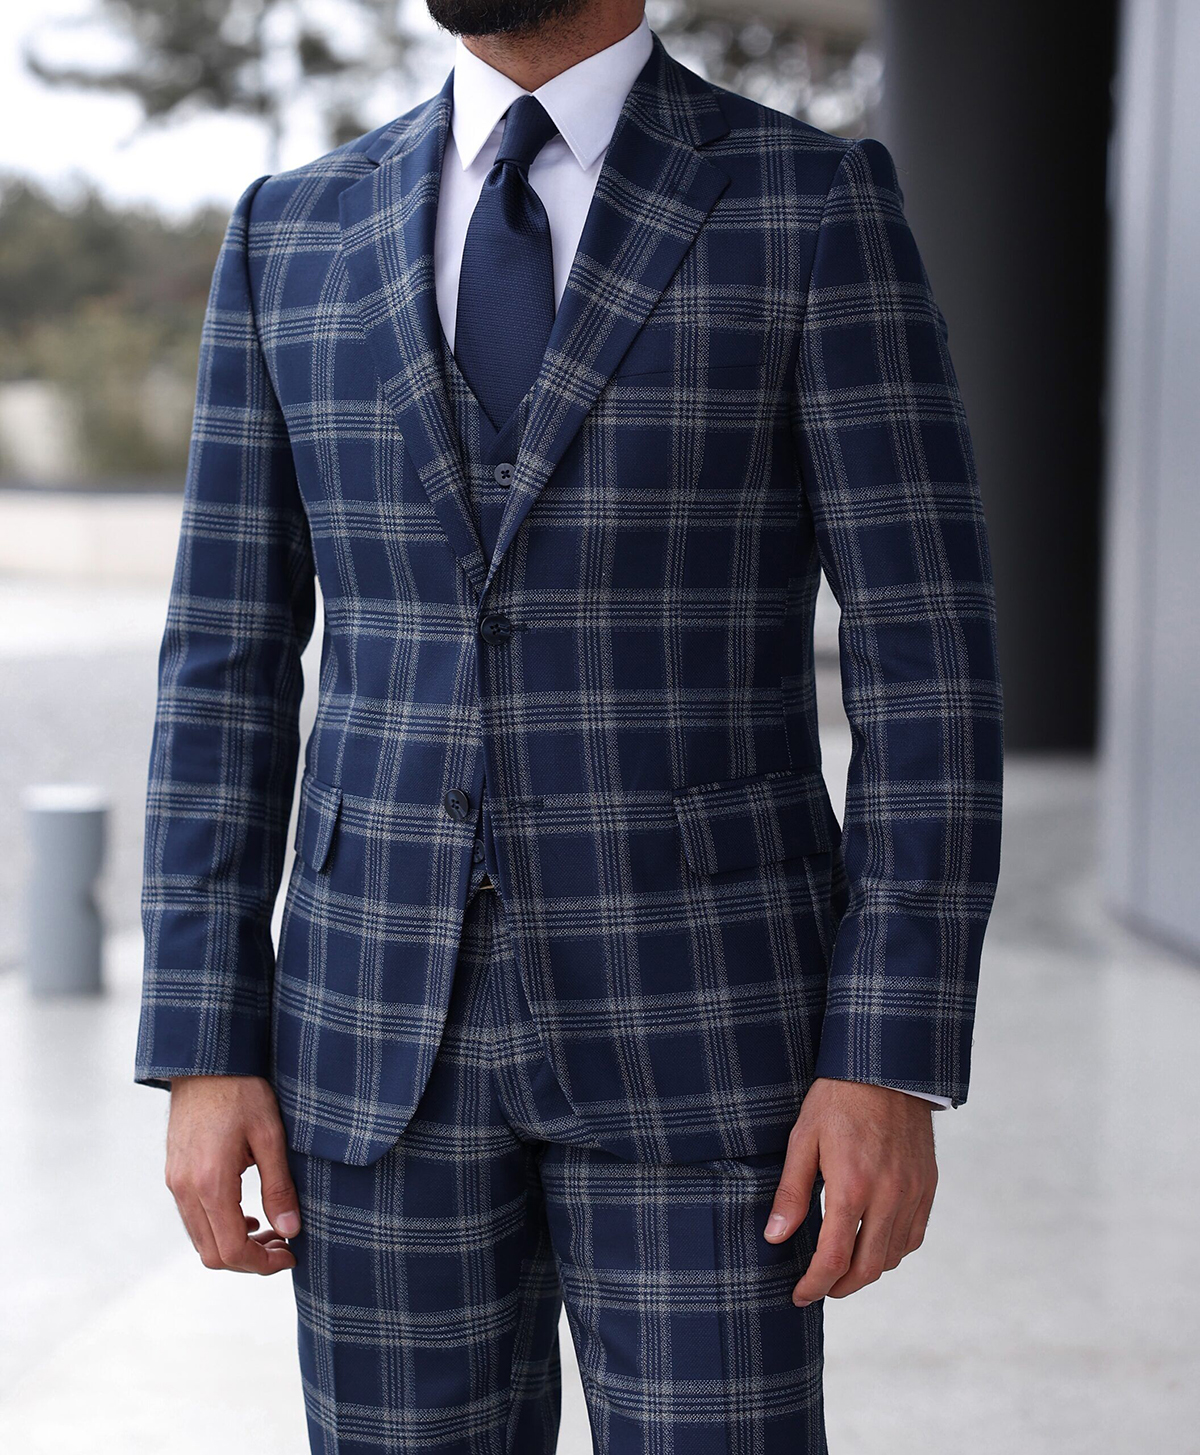 Plaid Men's Wedding Suits Notched Lapel Tuxedos Fashion Groom Wear For Male Custom Made Jacket+Pants +Vest